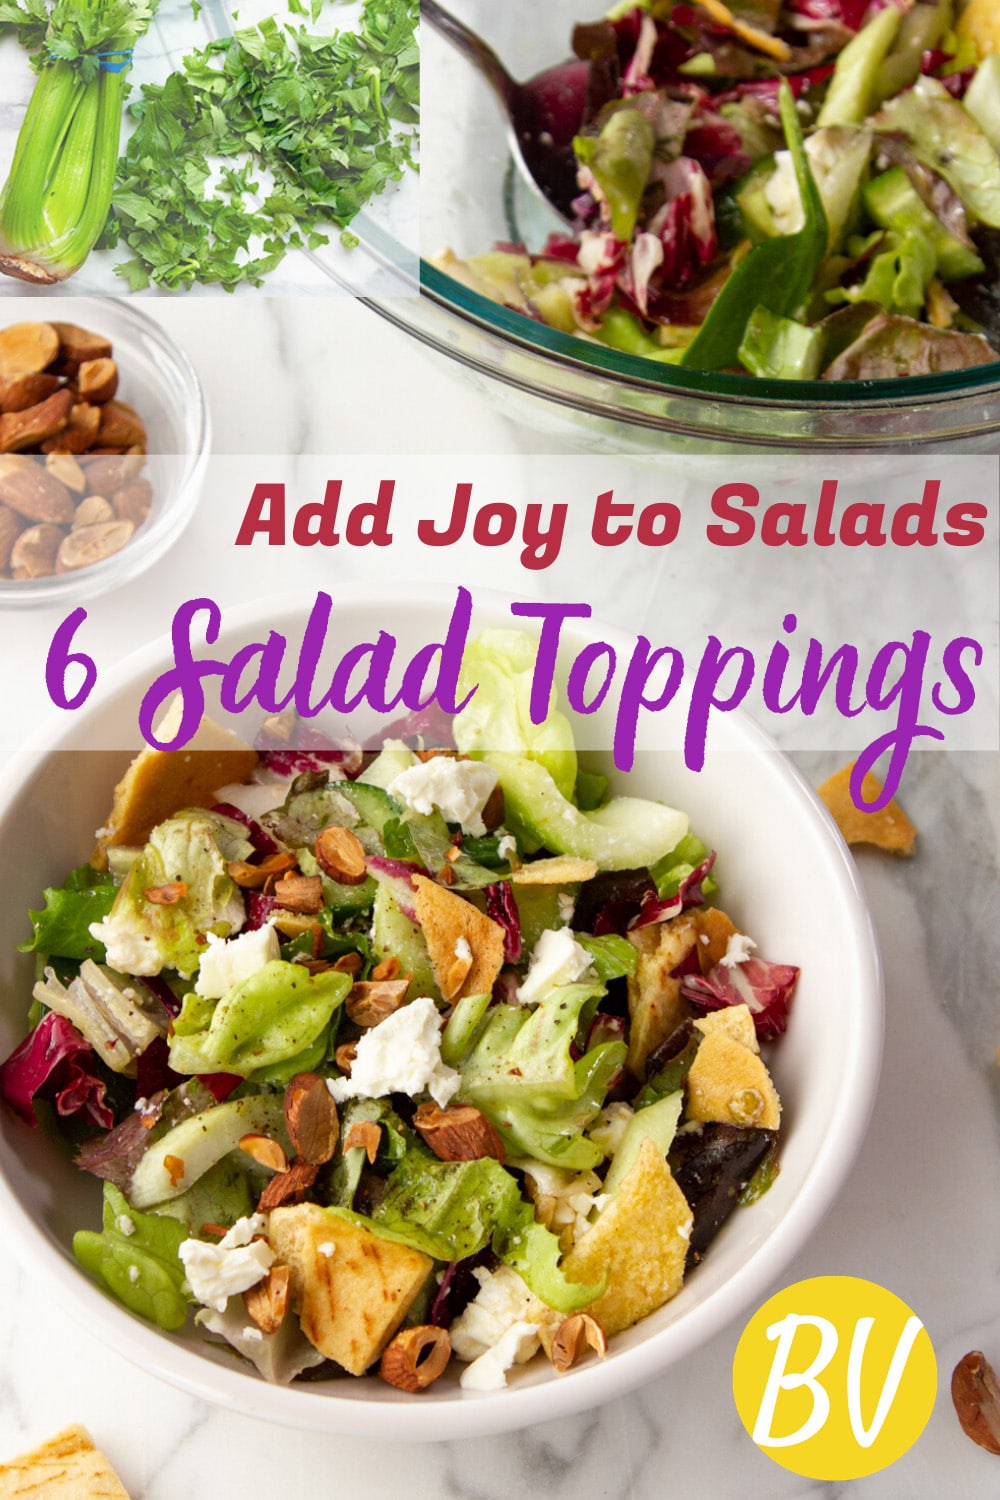 6 Salad Toppings that Add Joy To Winter Salads